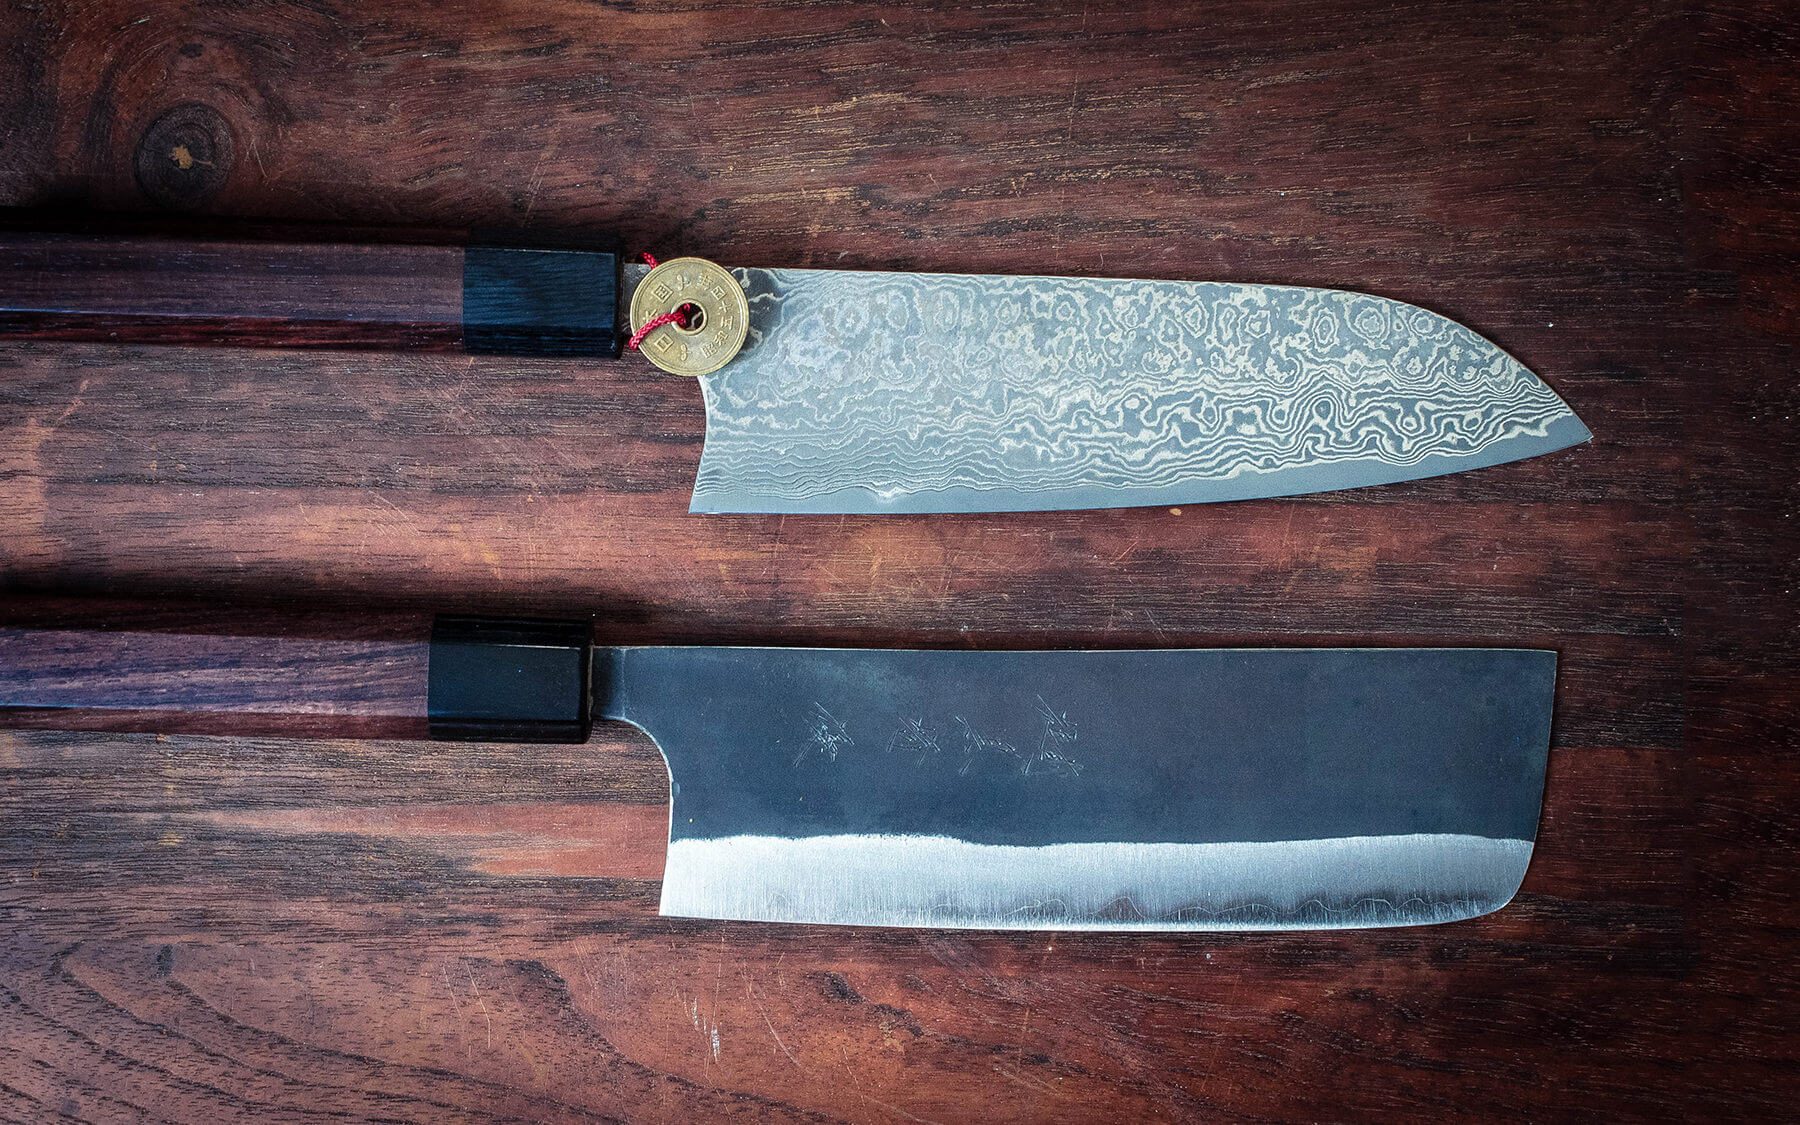 The story behind Artisan knives and the love for japanese knives